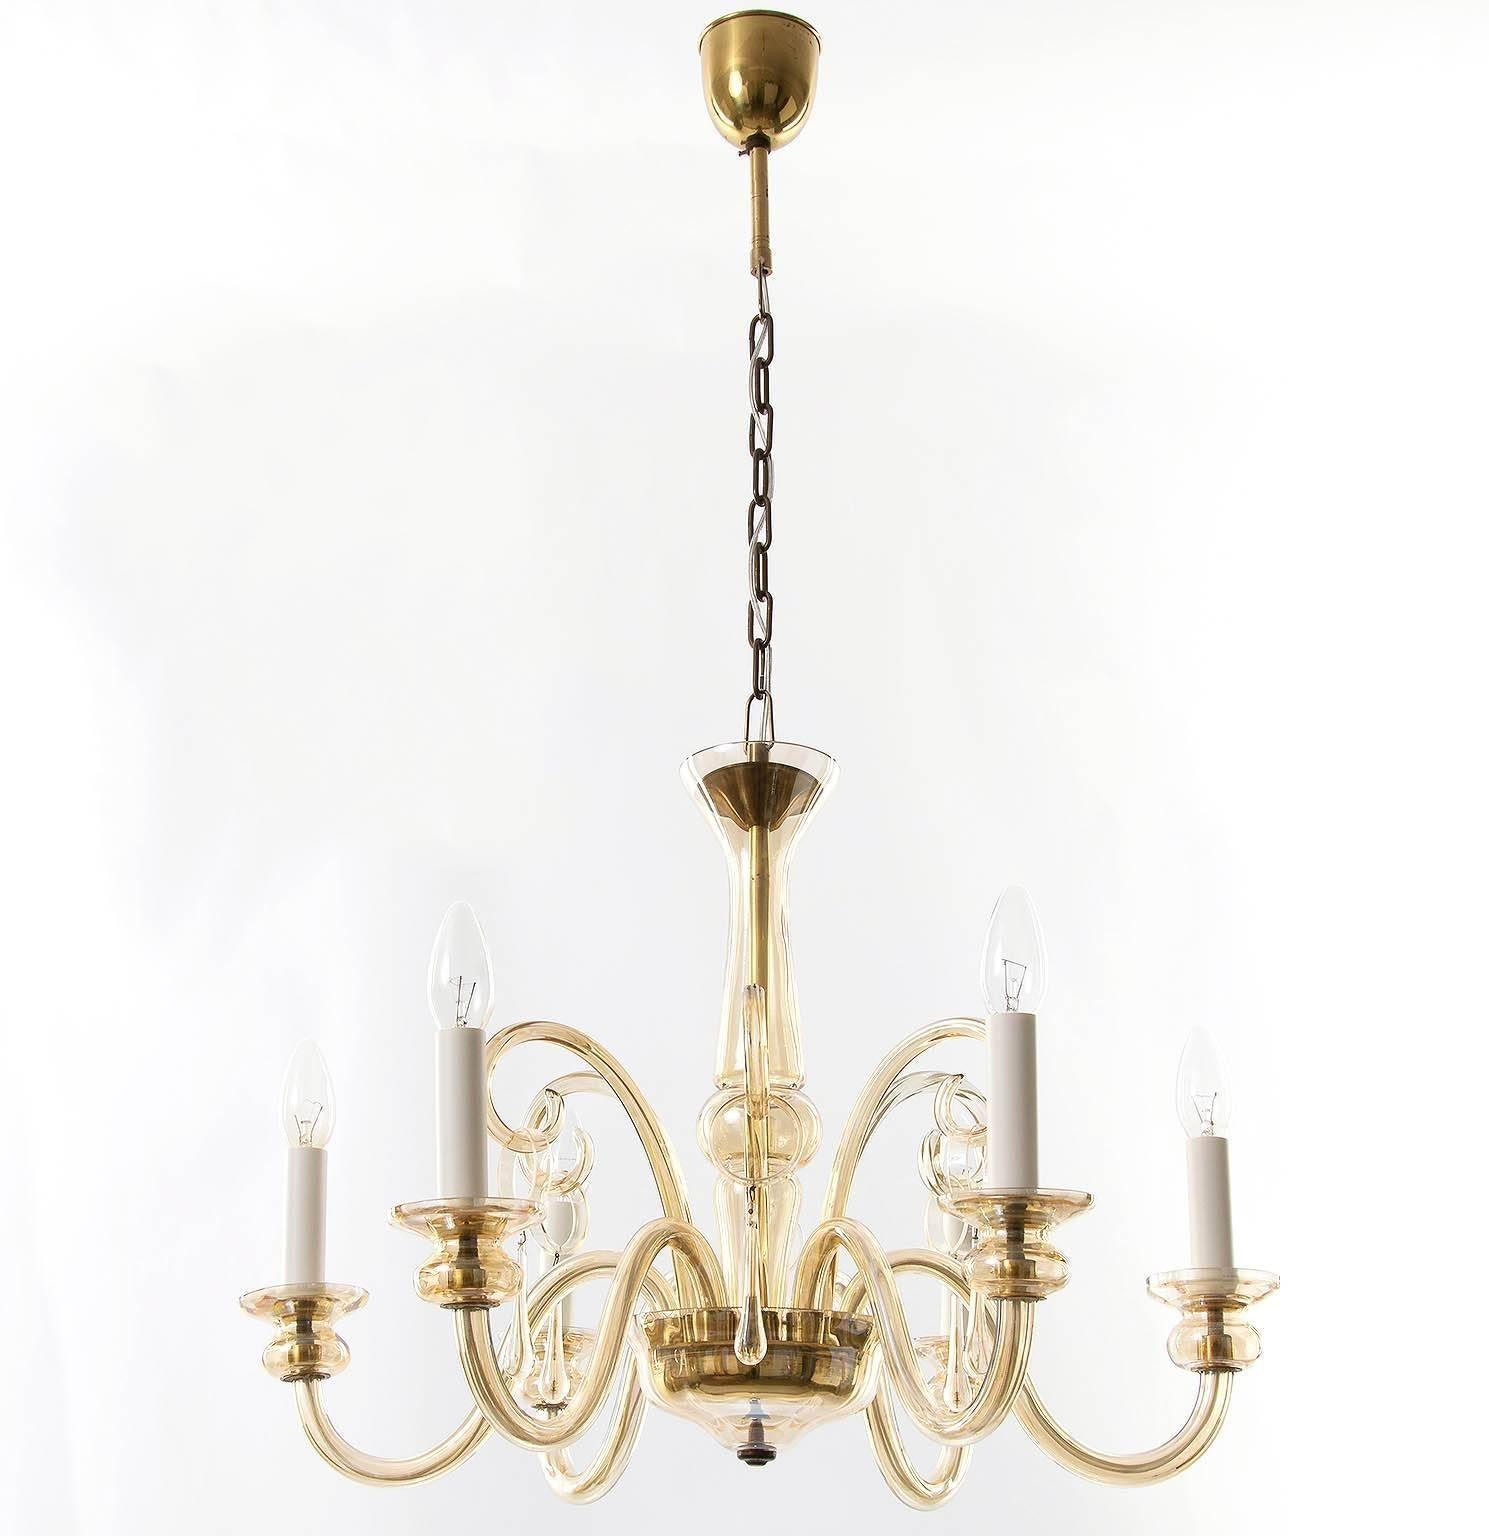 Mid-20th Century Art Deco Amber Tone Glass Chandelier For Sale